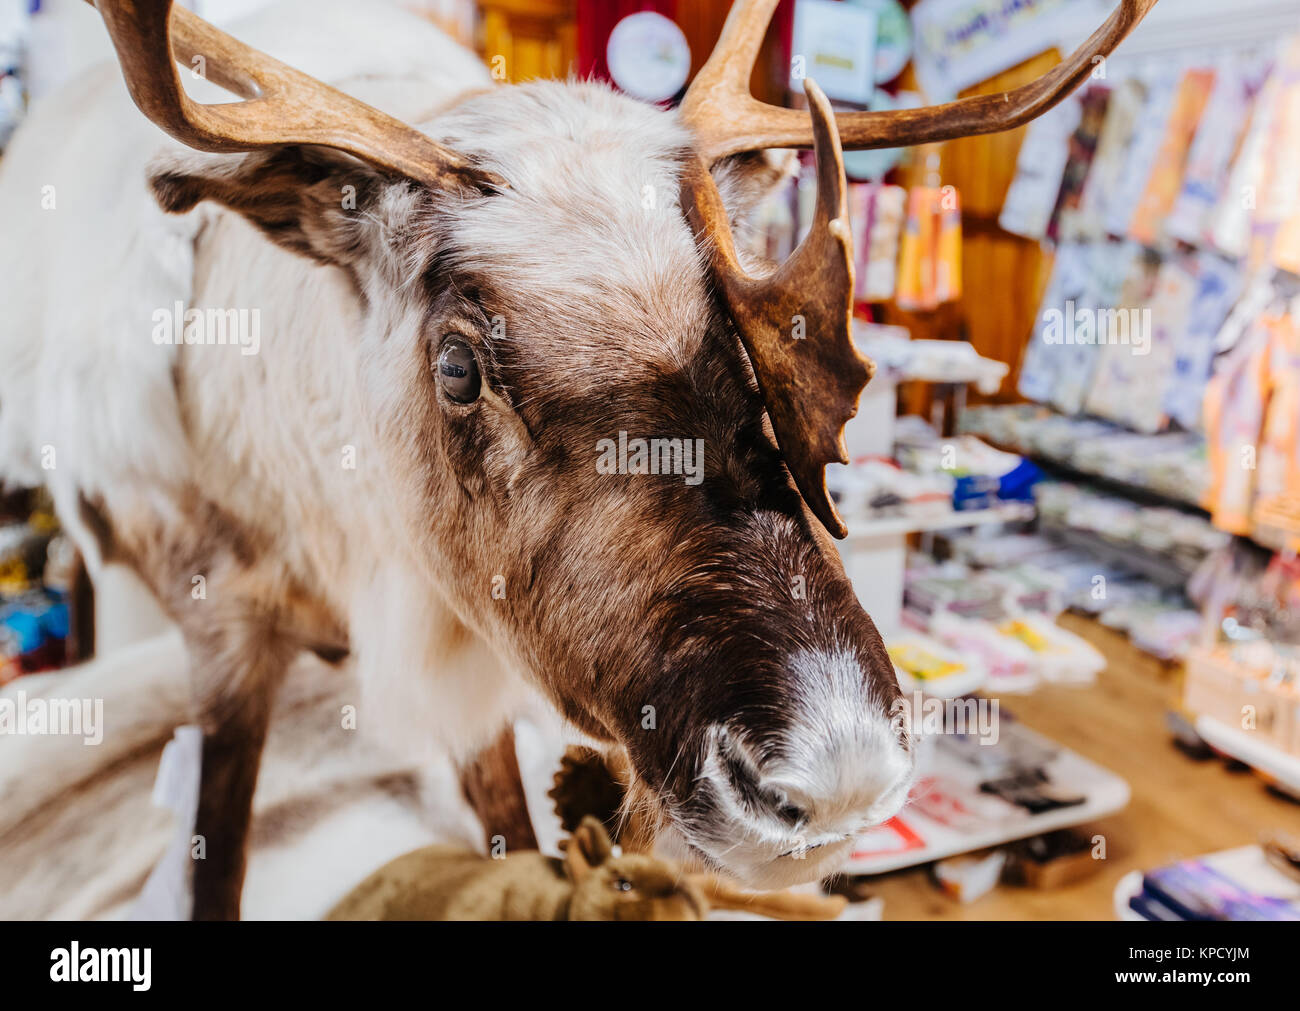 deer close up in the store Stock Photo